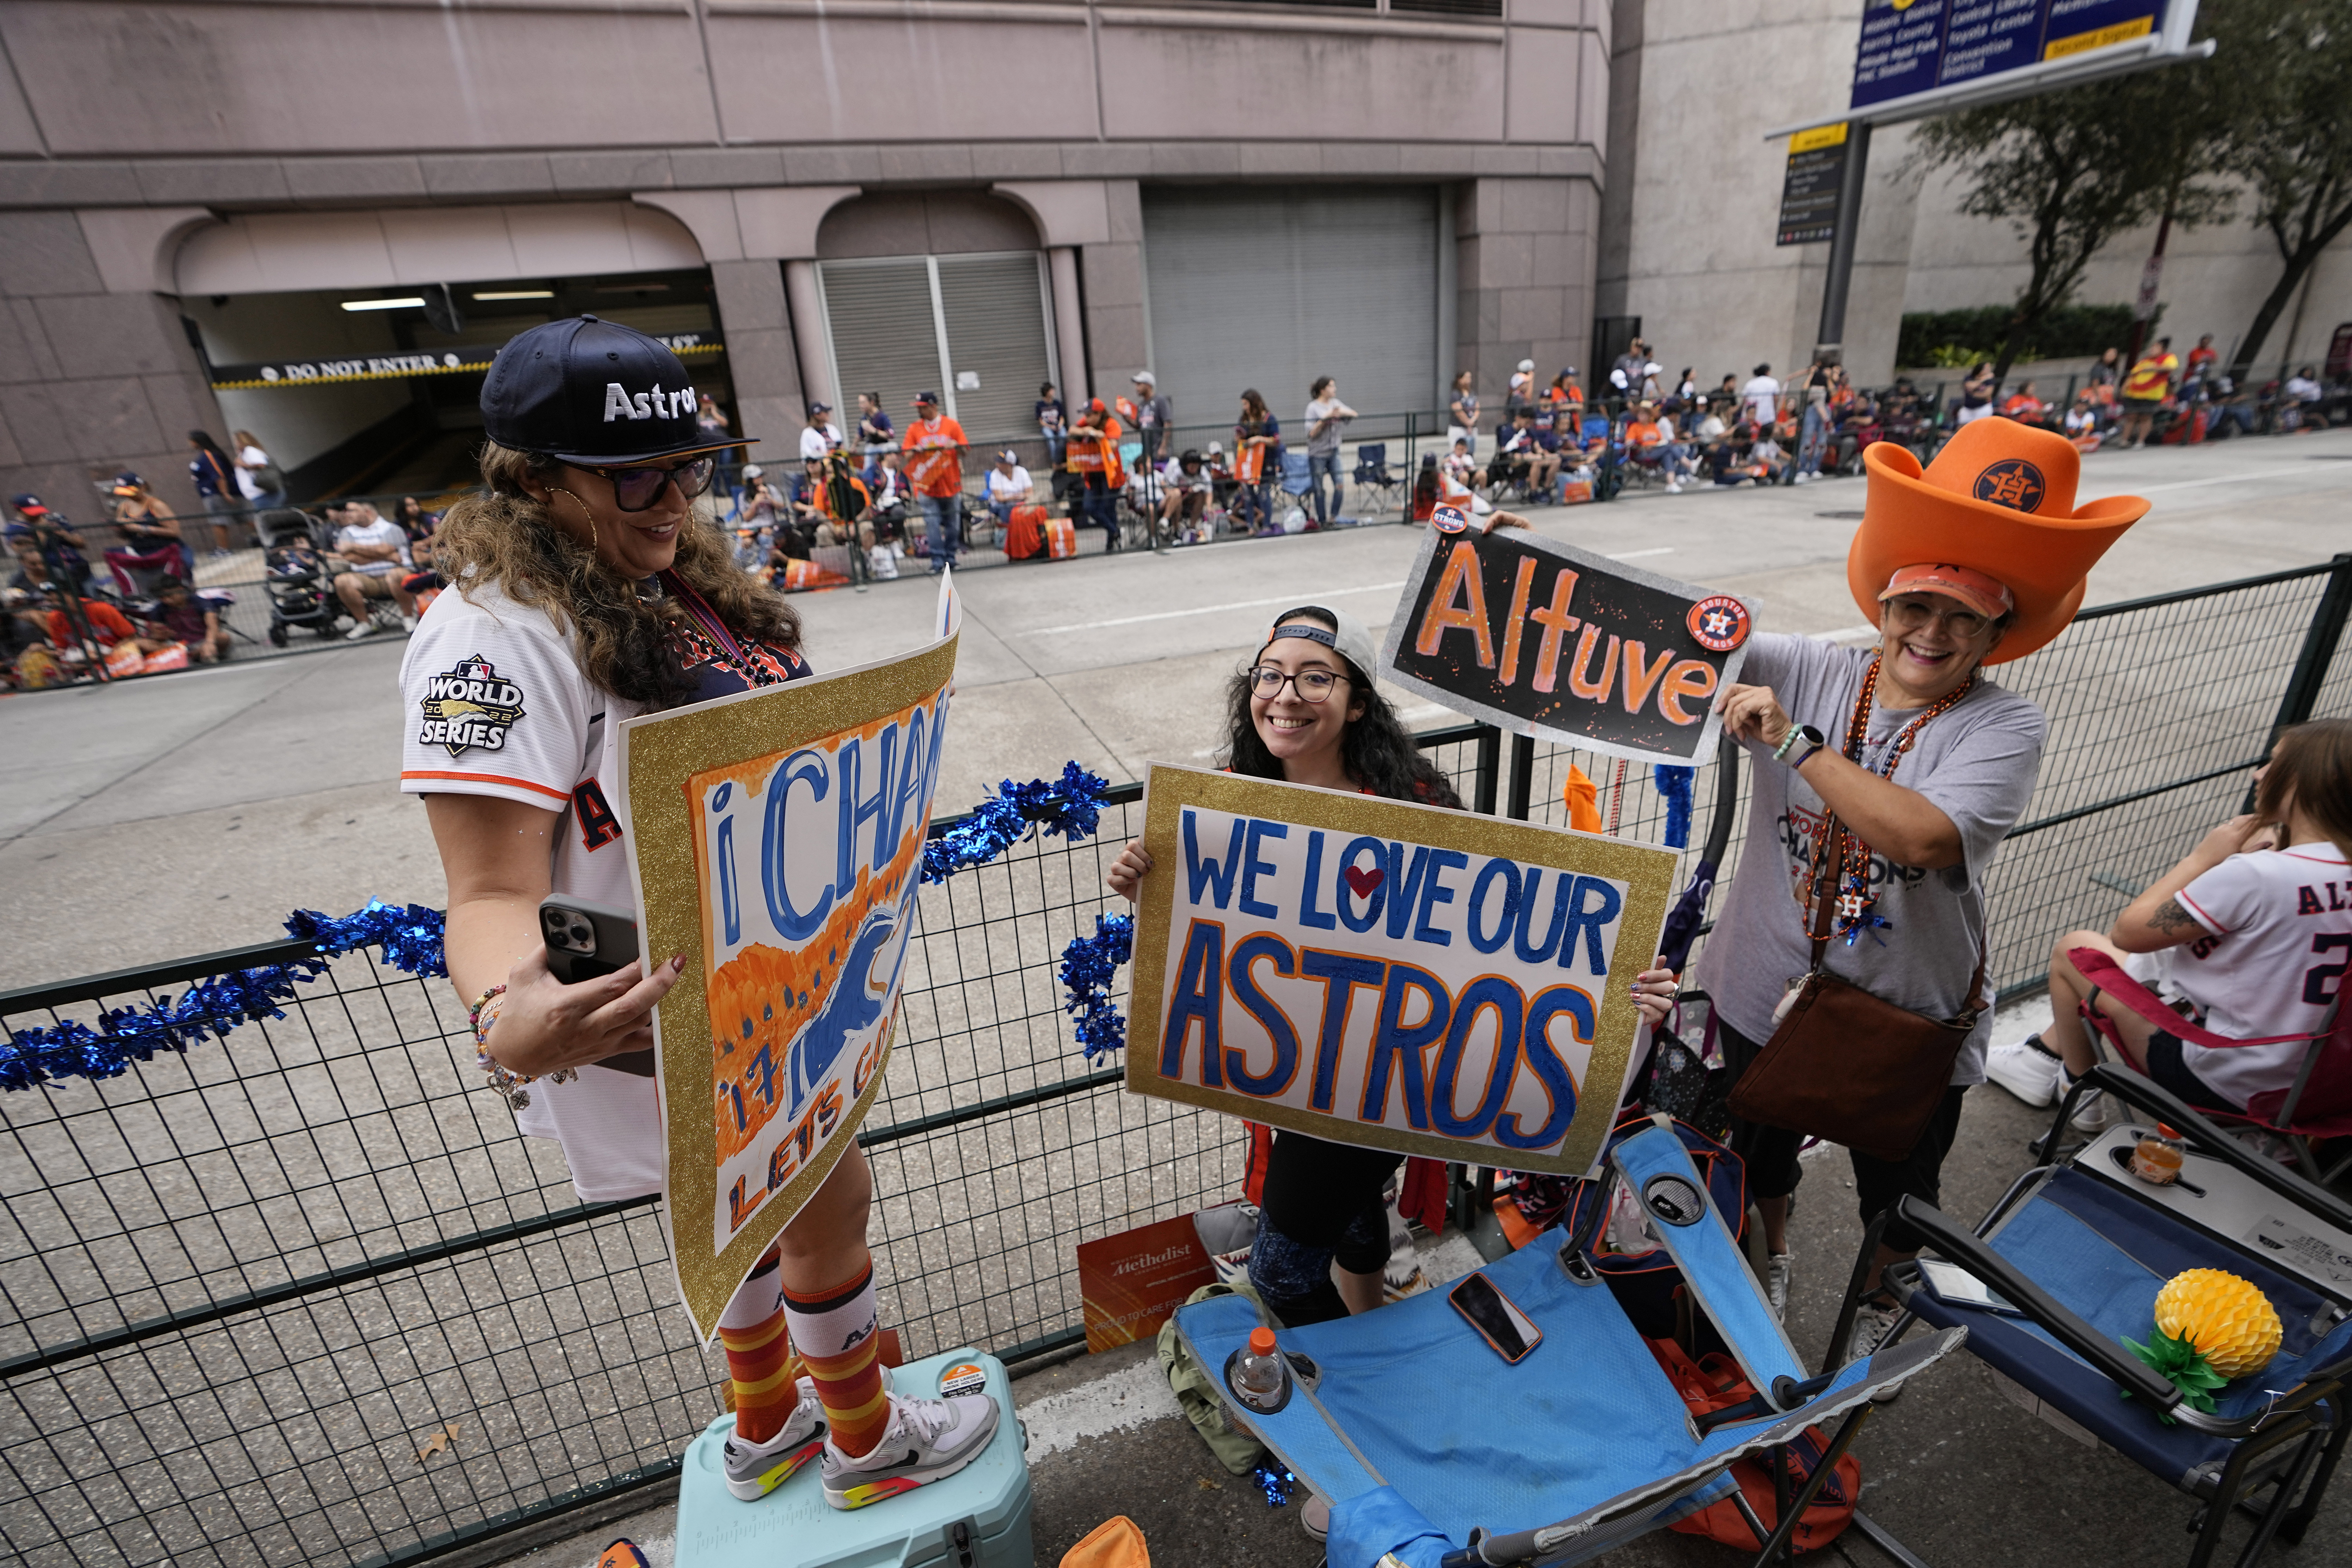 Editor's choice: Photos from the Astros championship parade